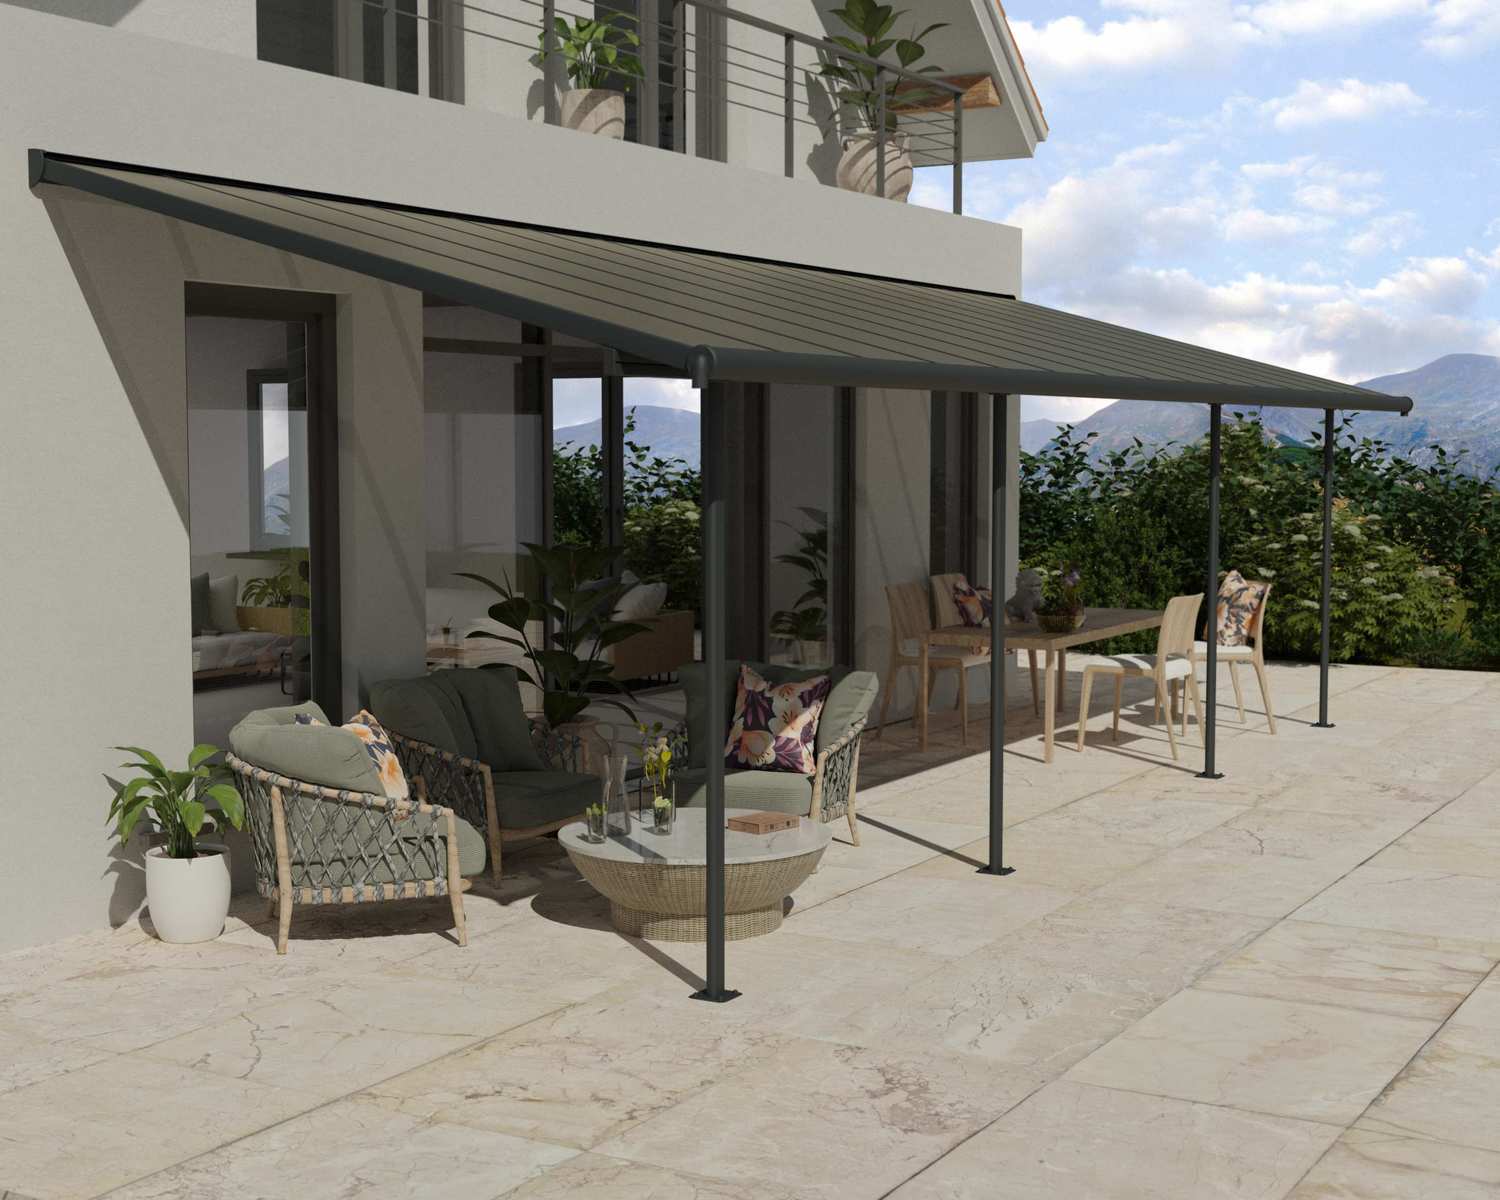 Capri 10 ft. x 30 ft. Grey Aluminium Patio Cover With 4 Posts, Bronze-Tinted Twin-wall Polycarbonate Roof Panels.